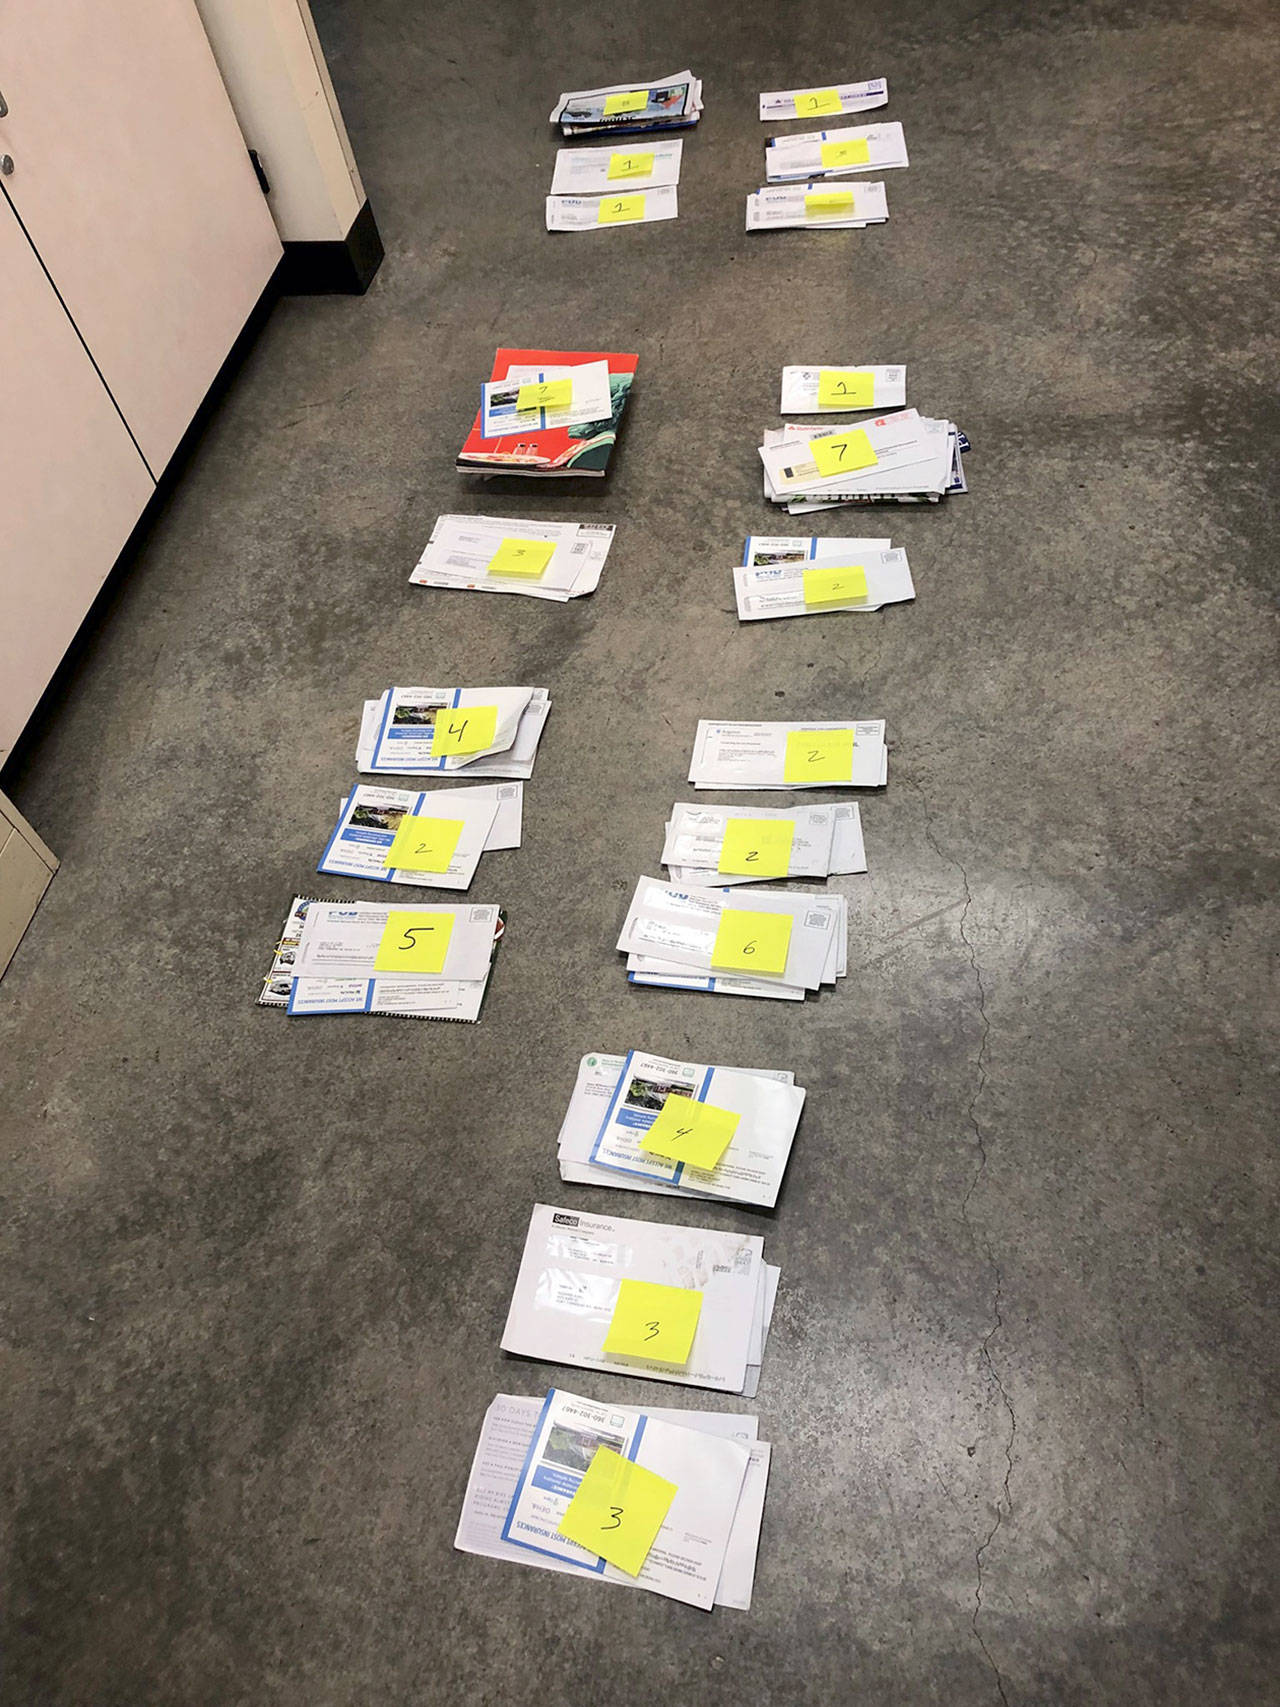 The Jefferson County Sheriff’s Office said these mail items were to be returned to the U.S. Post Office after they were found Wednesday when a deputy arrested a man on a warrant. (Jefferson County Sheriff’s Office)